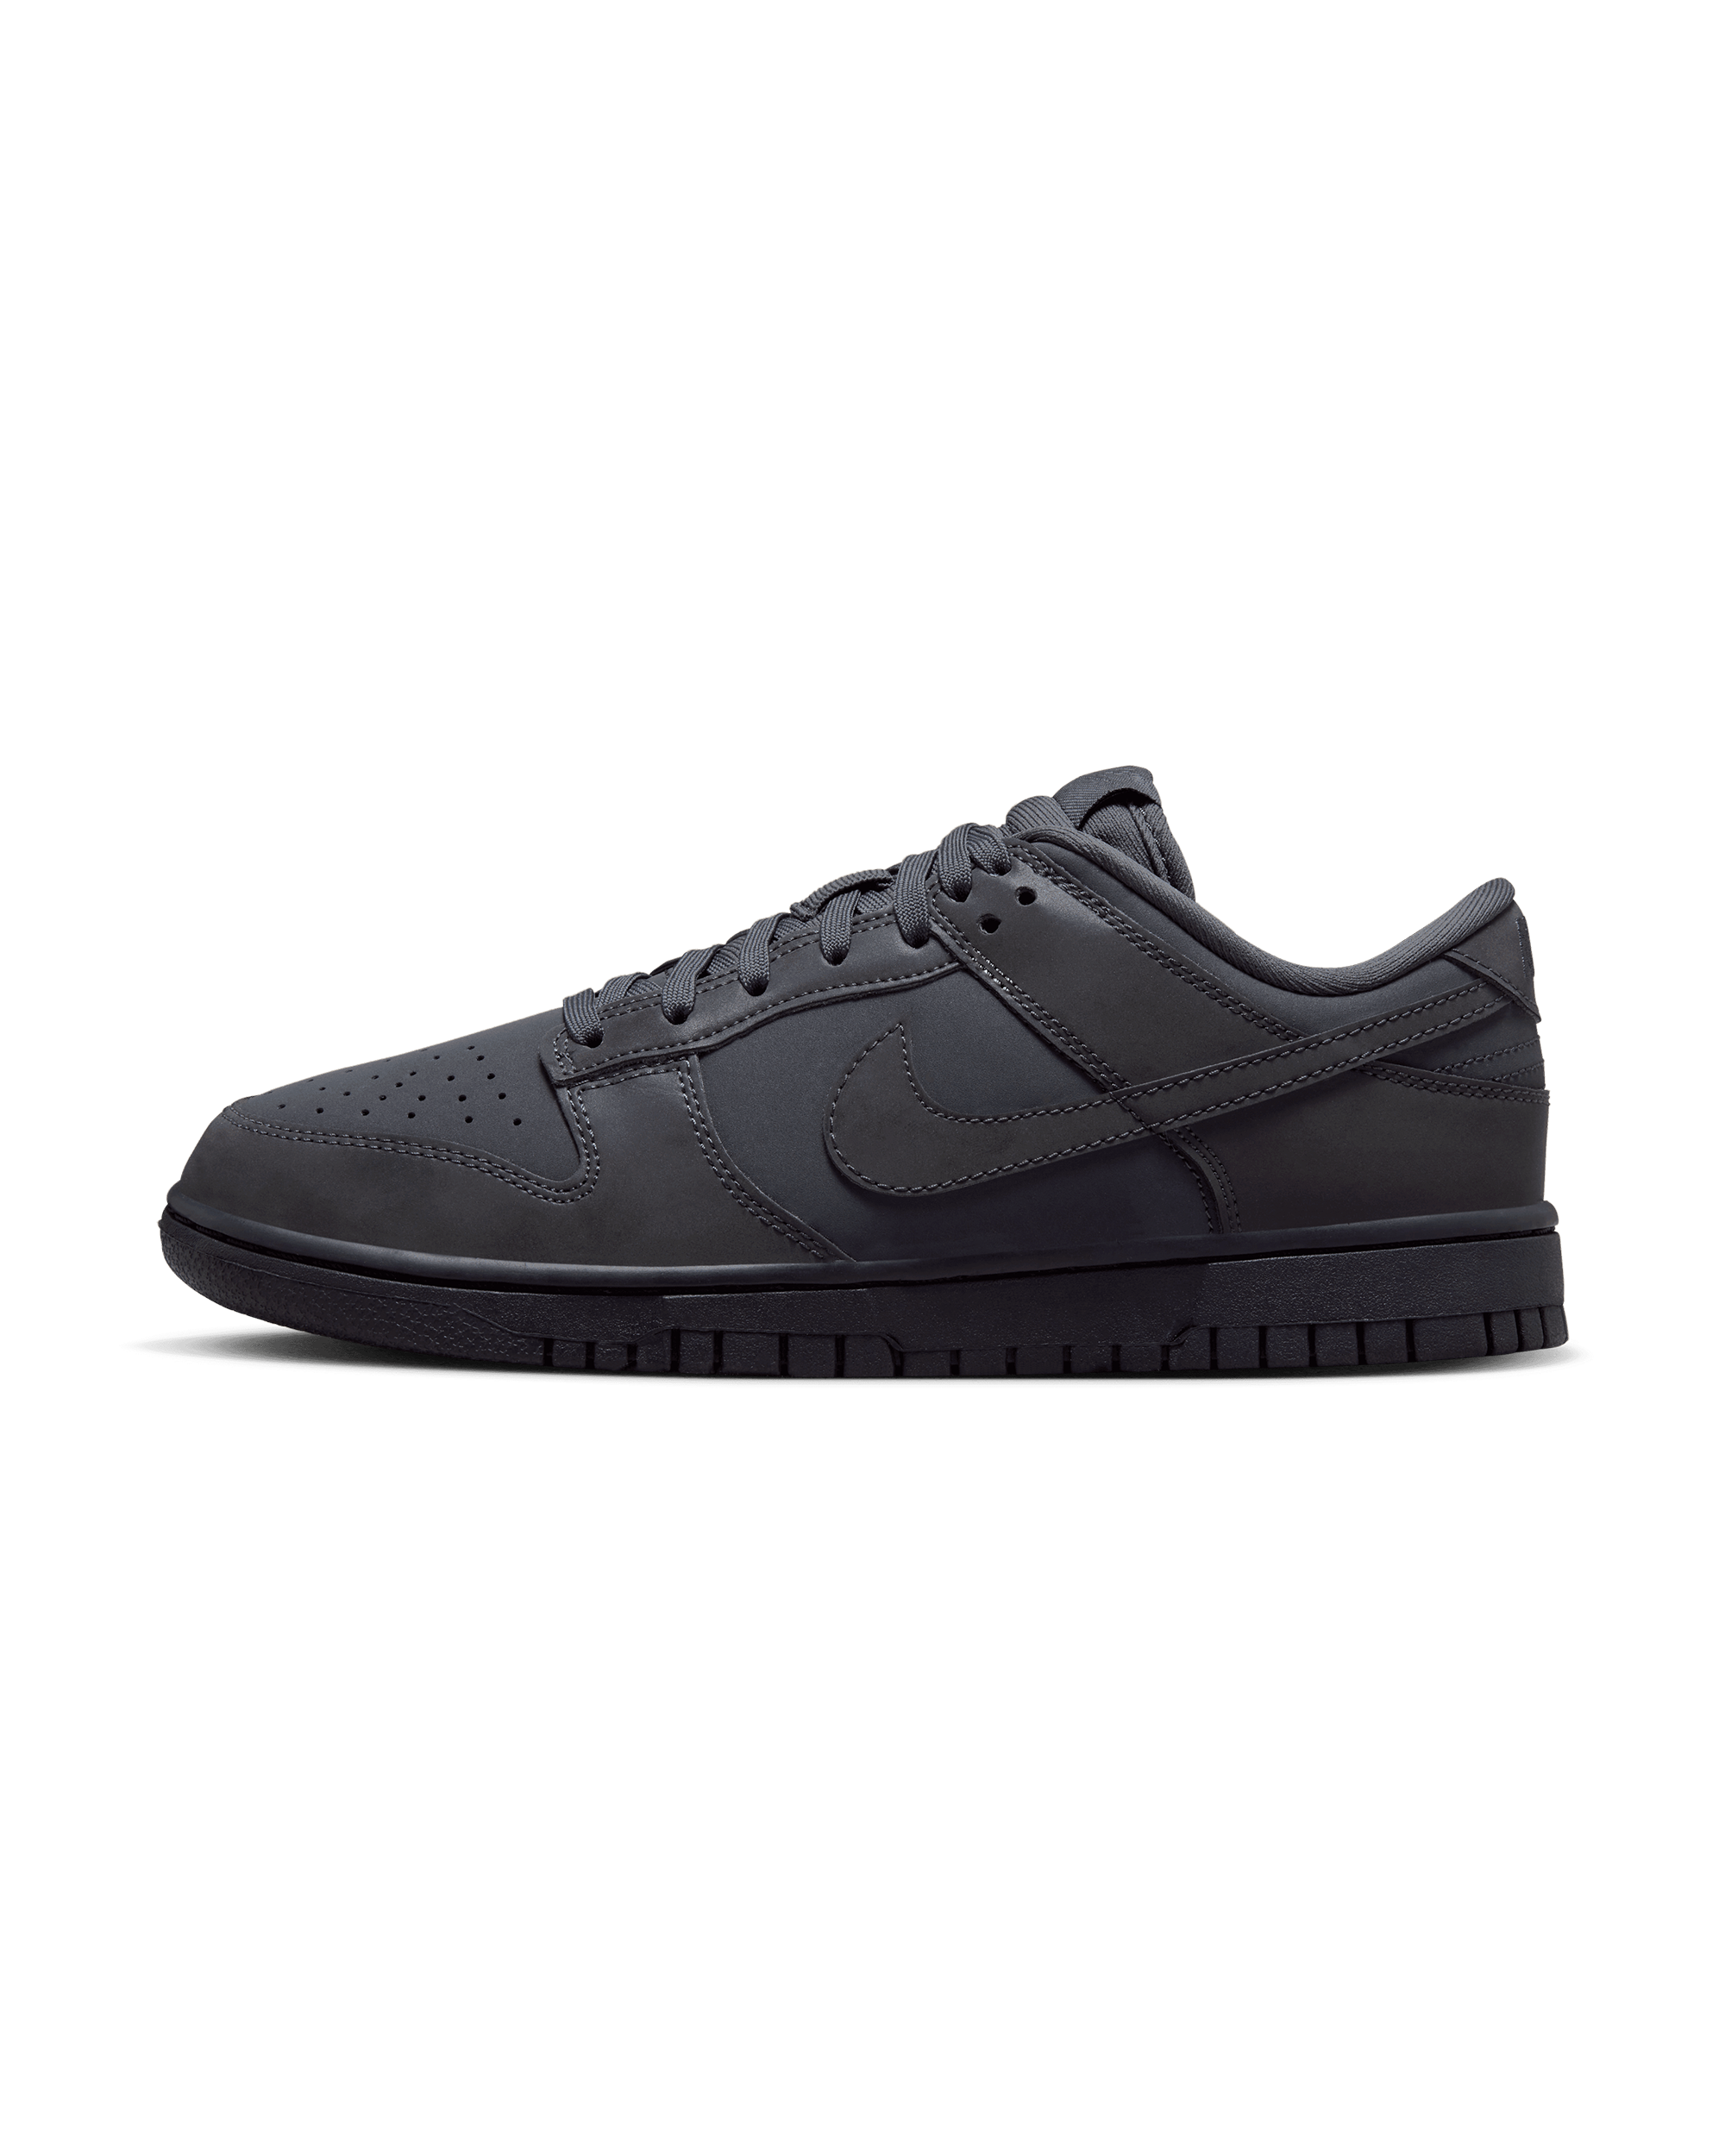 Womens Dunk Low "Cyber Reflective" - Black / Anthracite